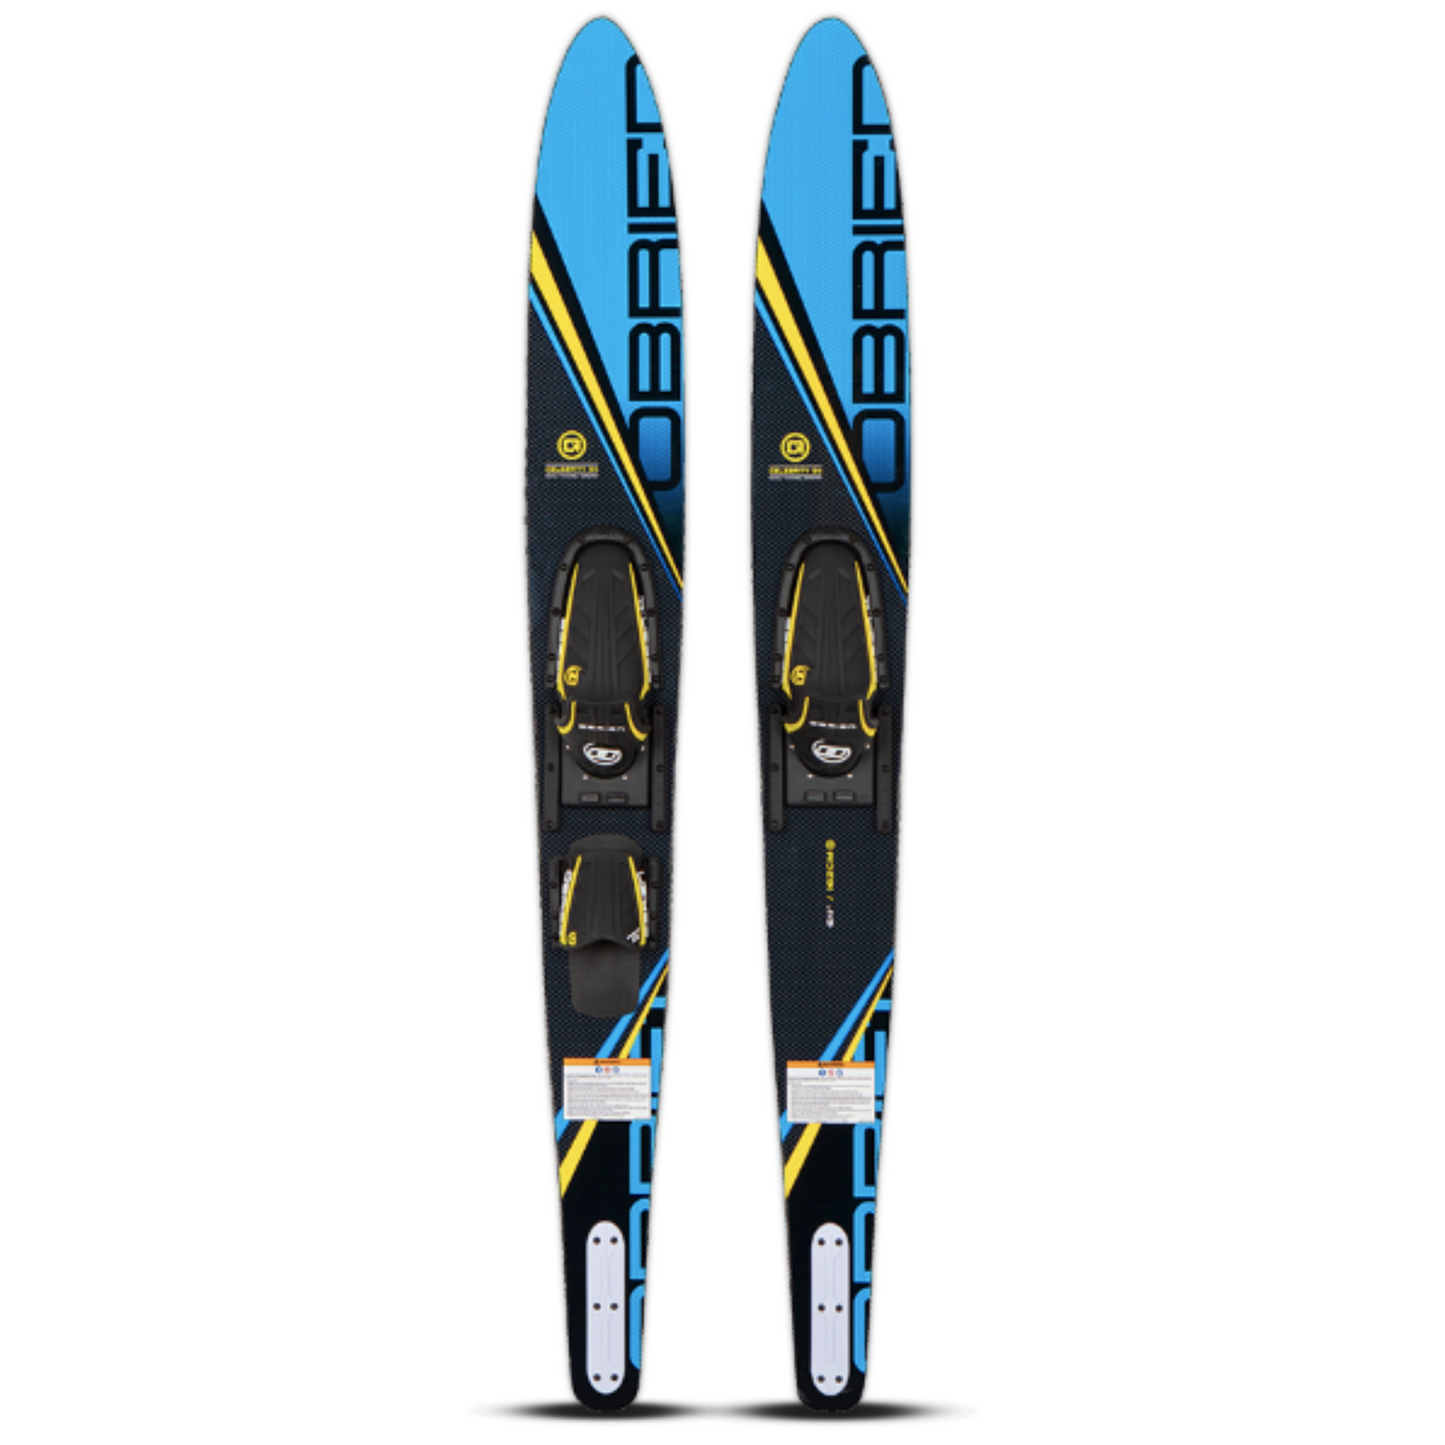 O'Brien Performer 68" combo waterskis in blue